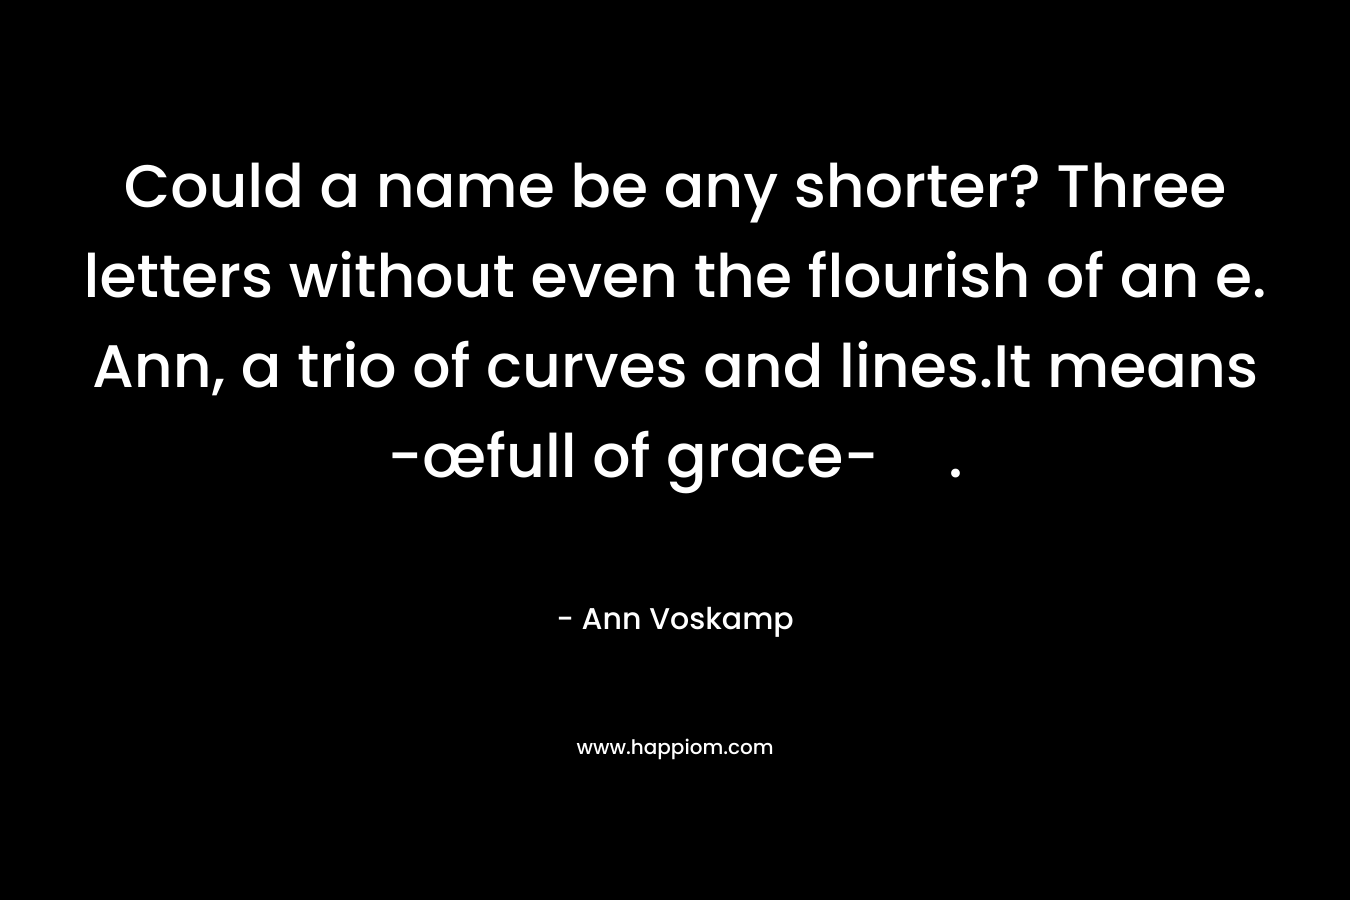 Could a name be any shorter? Three letters without even the flourish of an e. Ann, a trio of curves and lines.It means -œfull of grace-. – Ann Voskamp